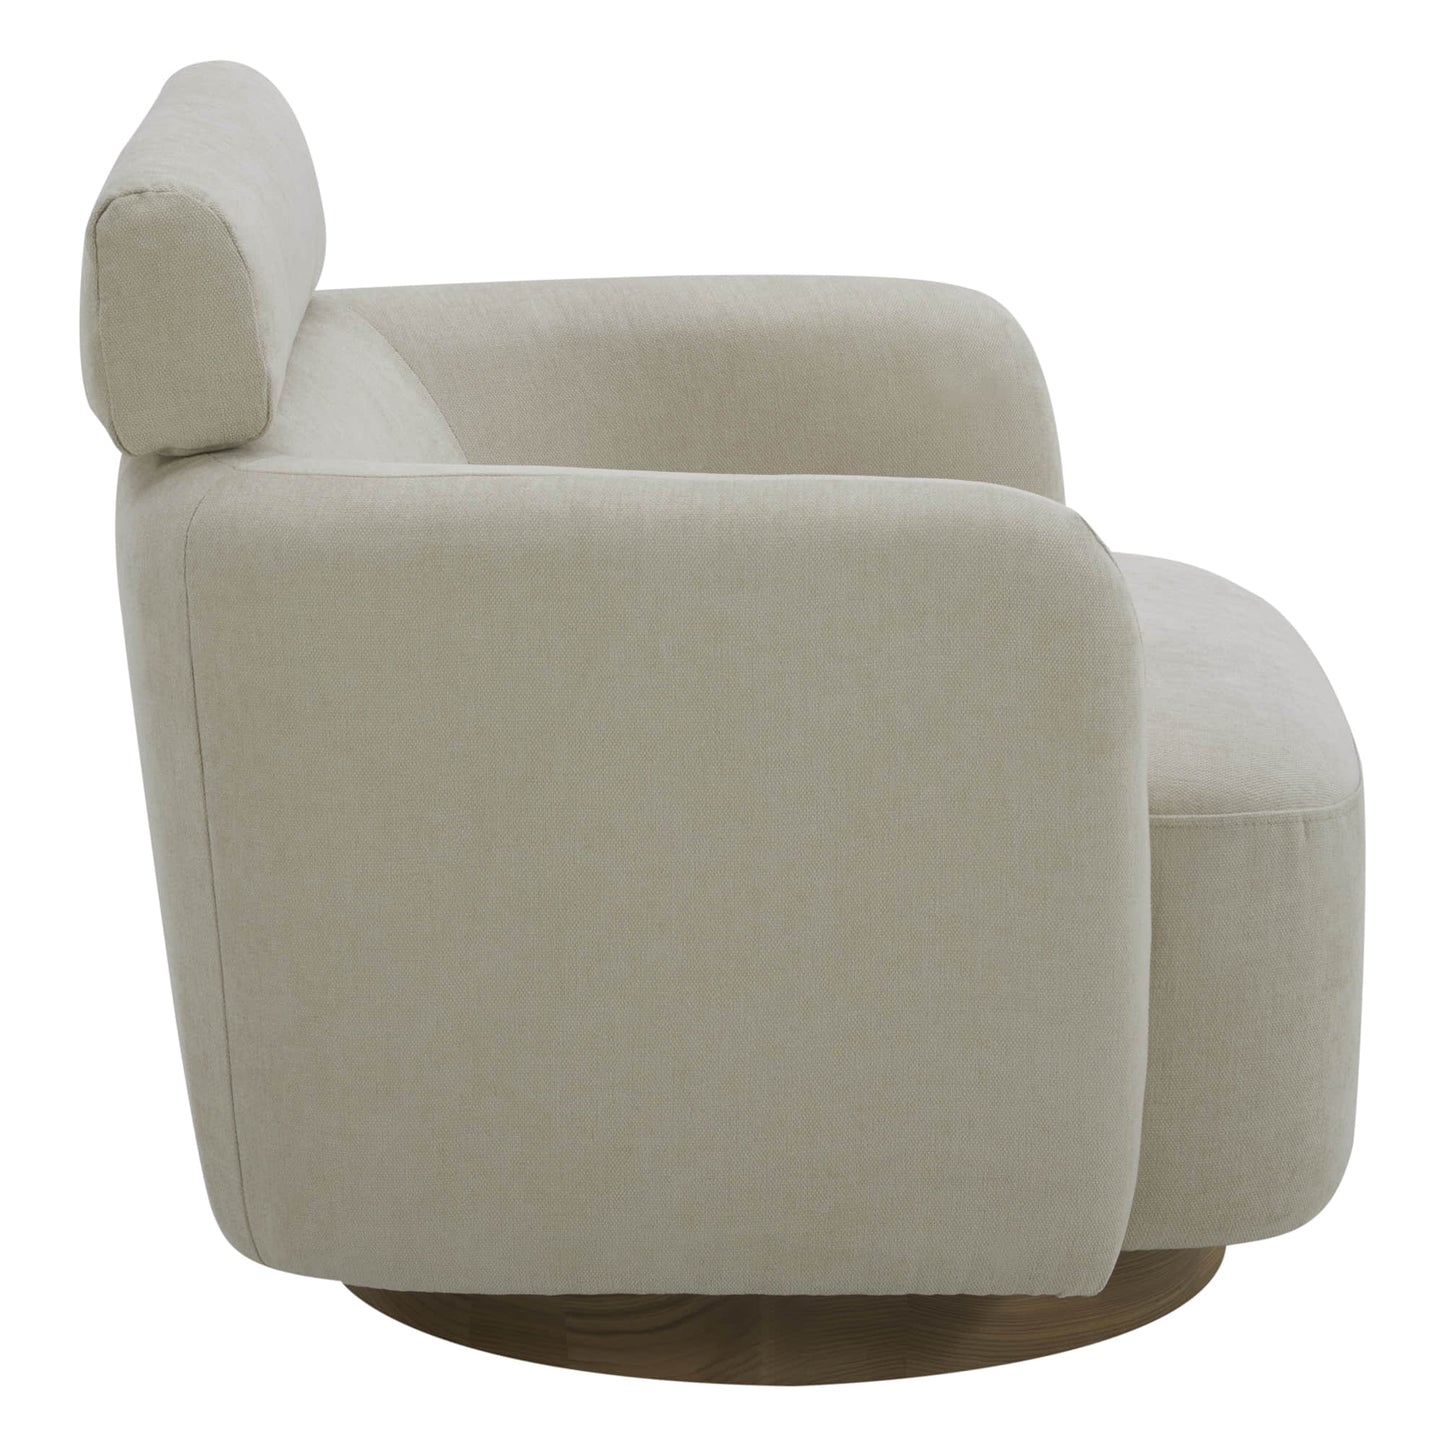 CHITA LIVING-Luna Swivel Accent Chair With Adjustable Backrest-Accent Chair-Fabric-Cream-